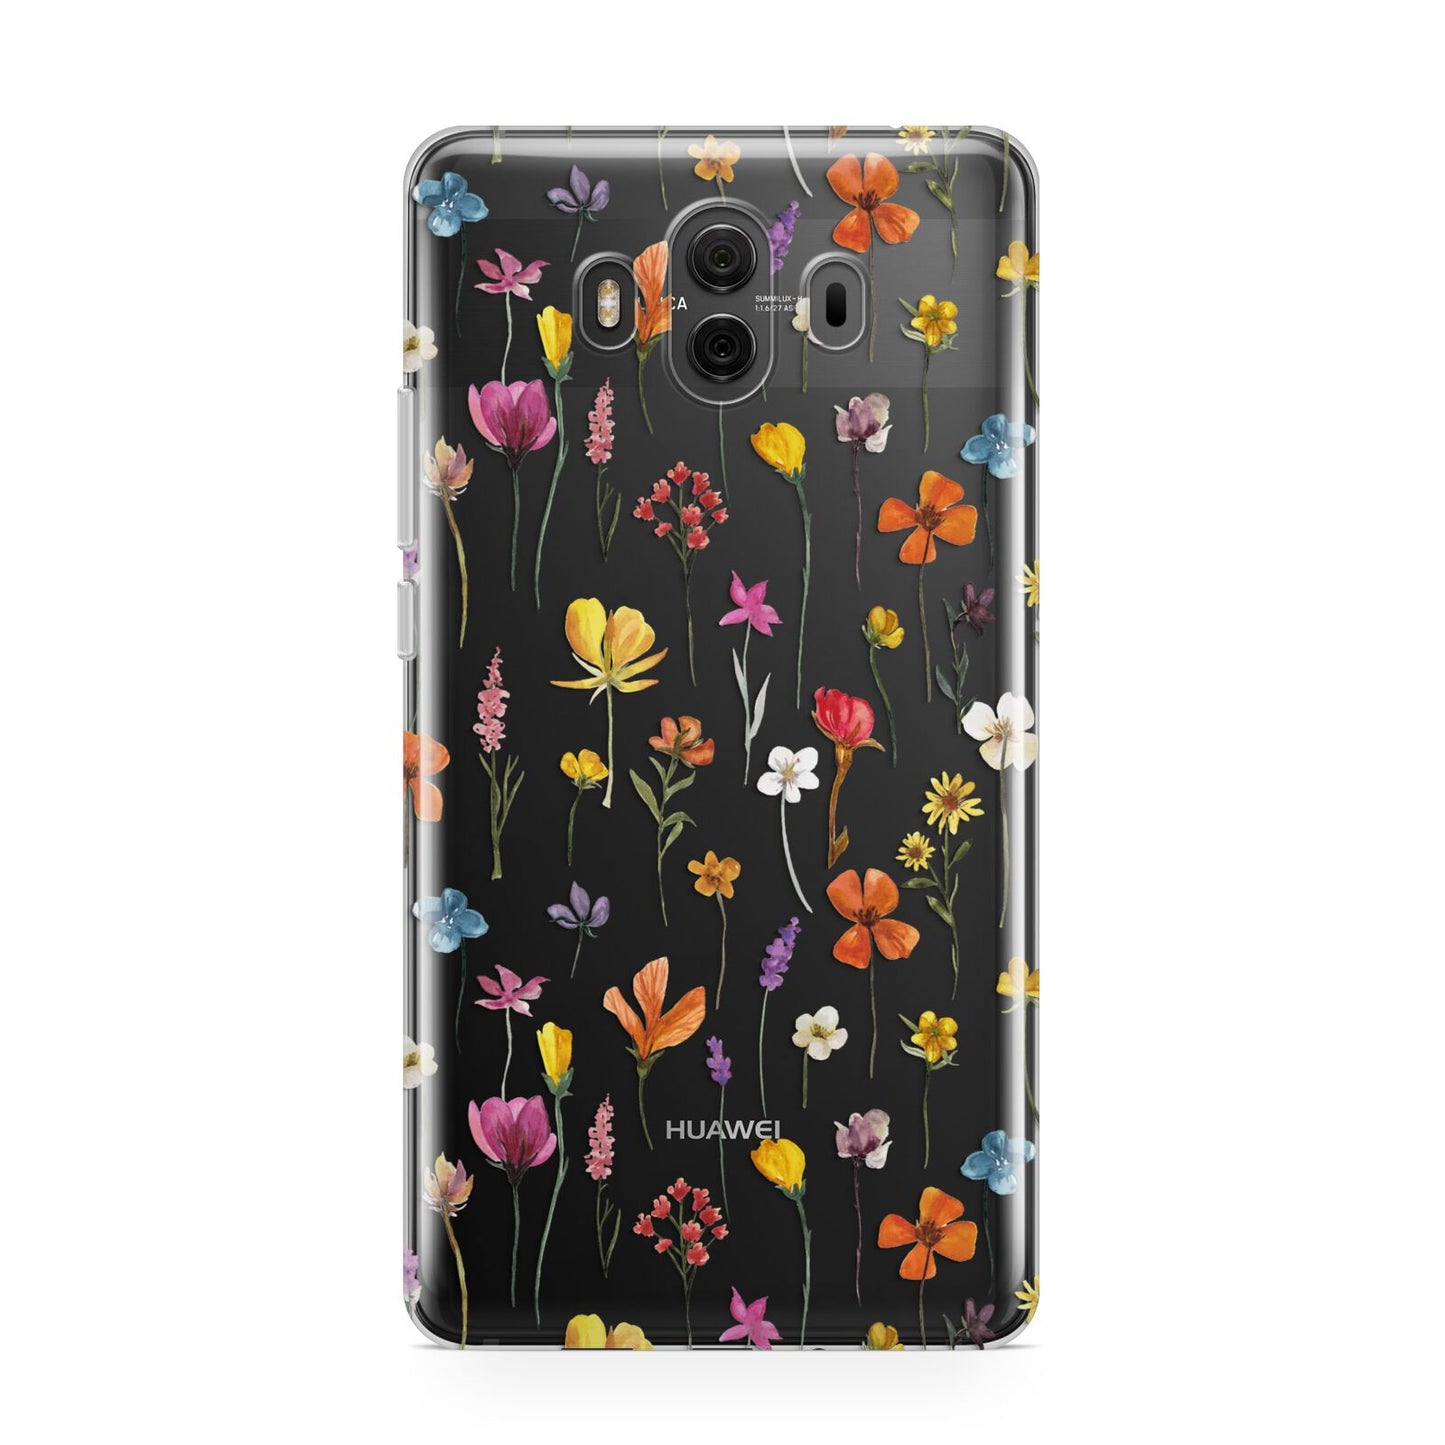 Botanical Floral Huawei Mate 10 Protective Phone Case